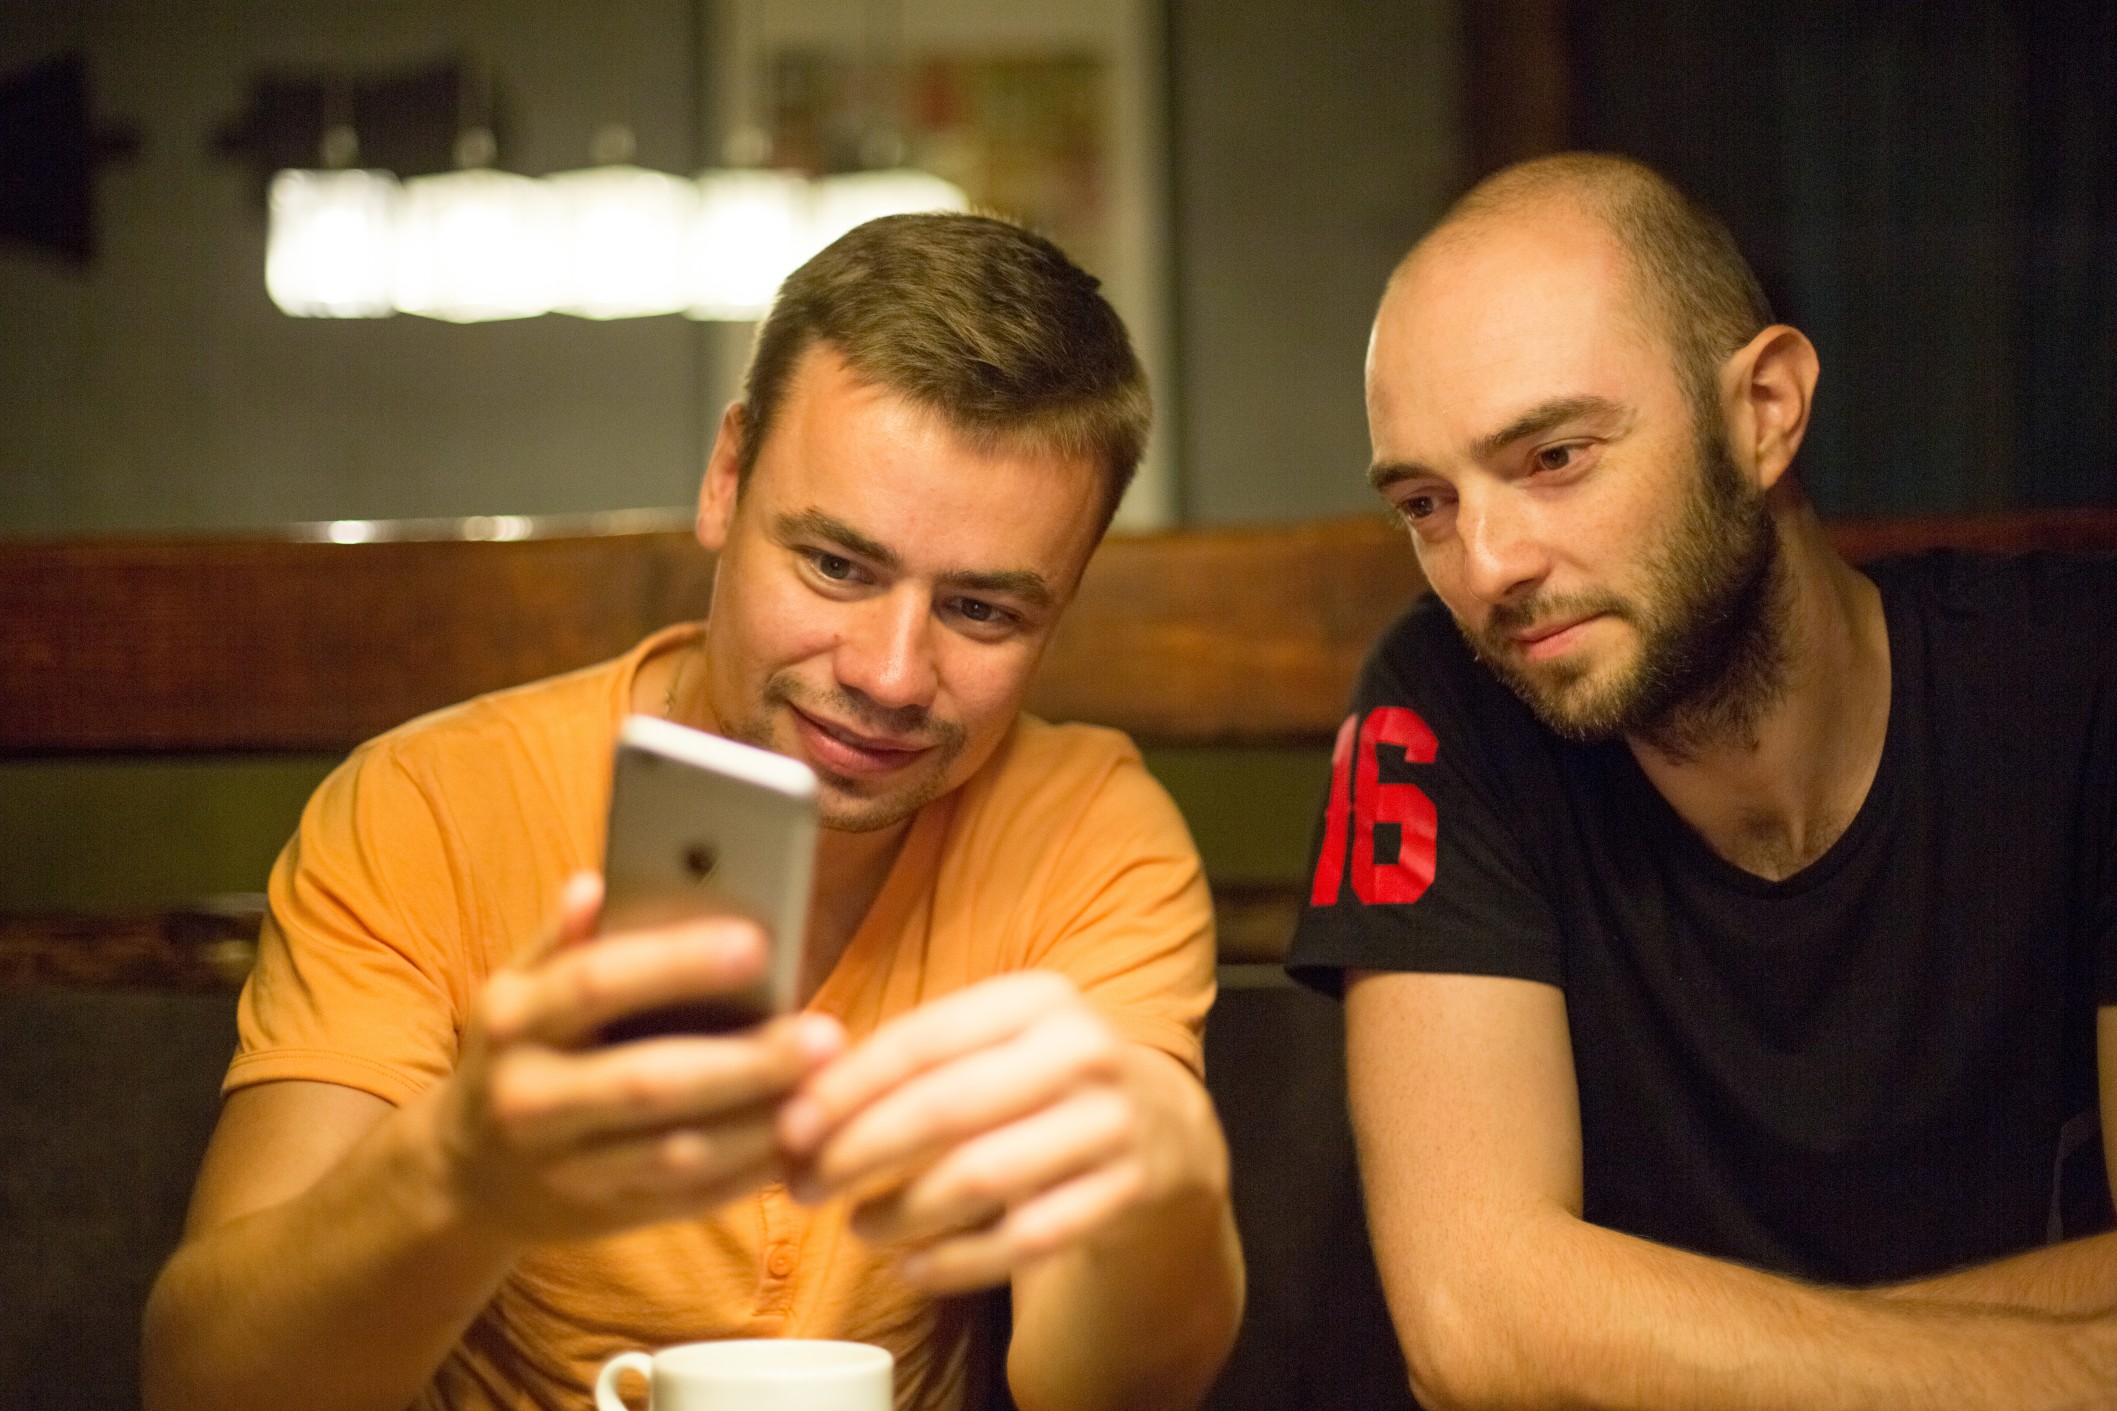 Two WordPress developers sitting at table exploring career opportunities with remap online on smartphone